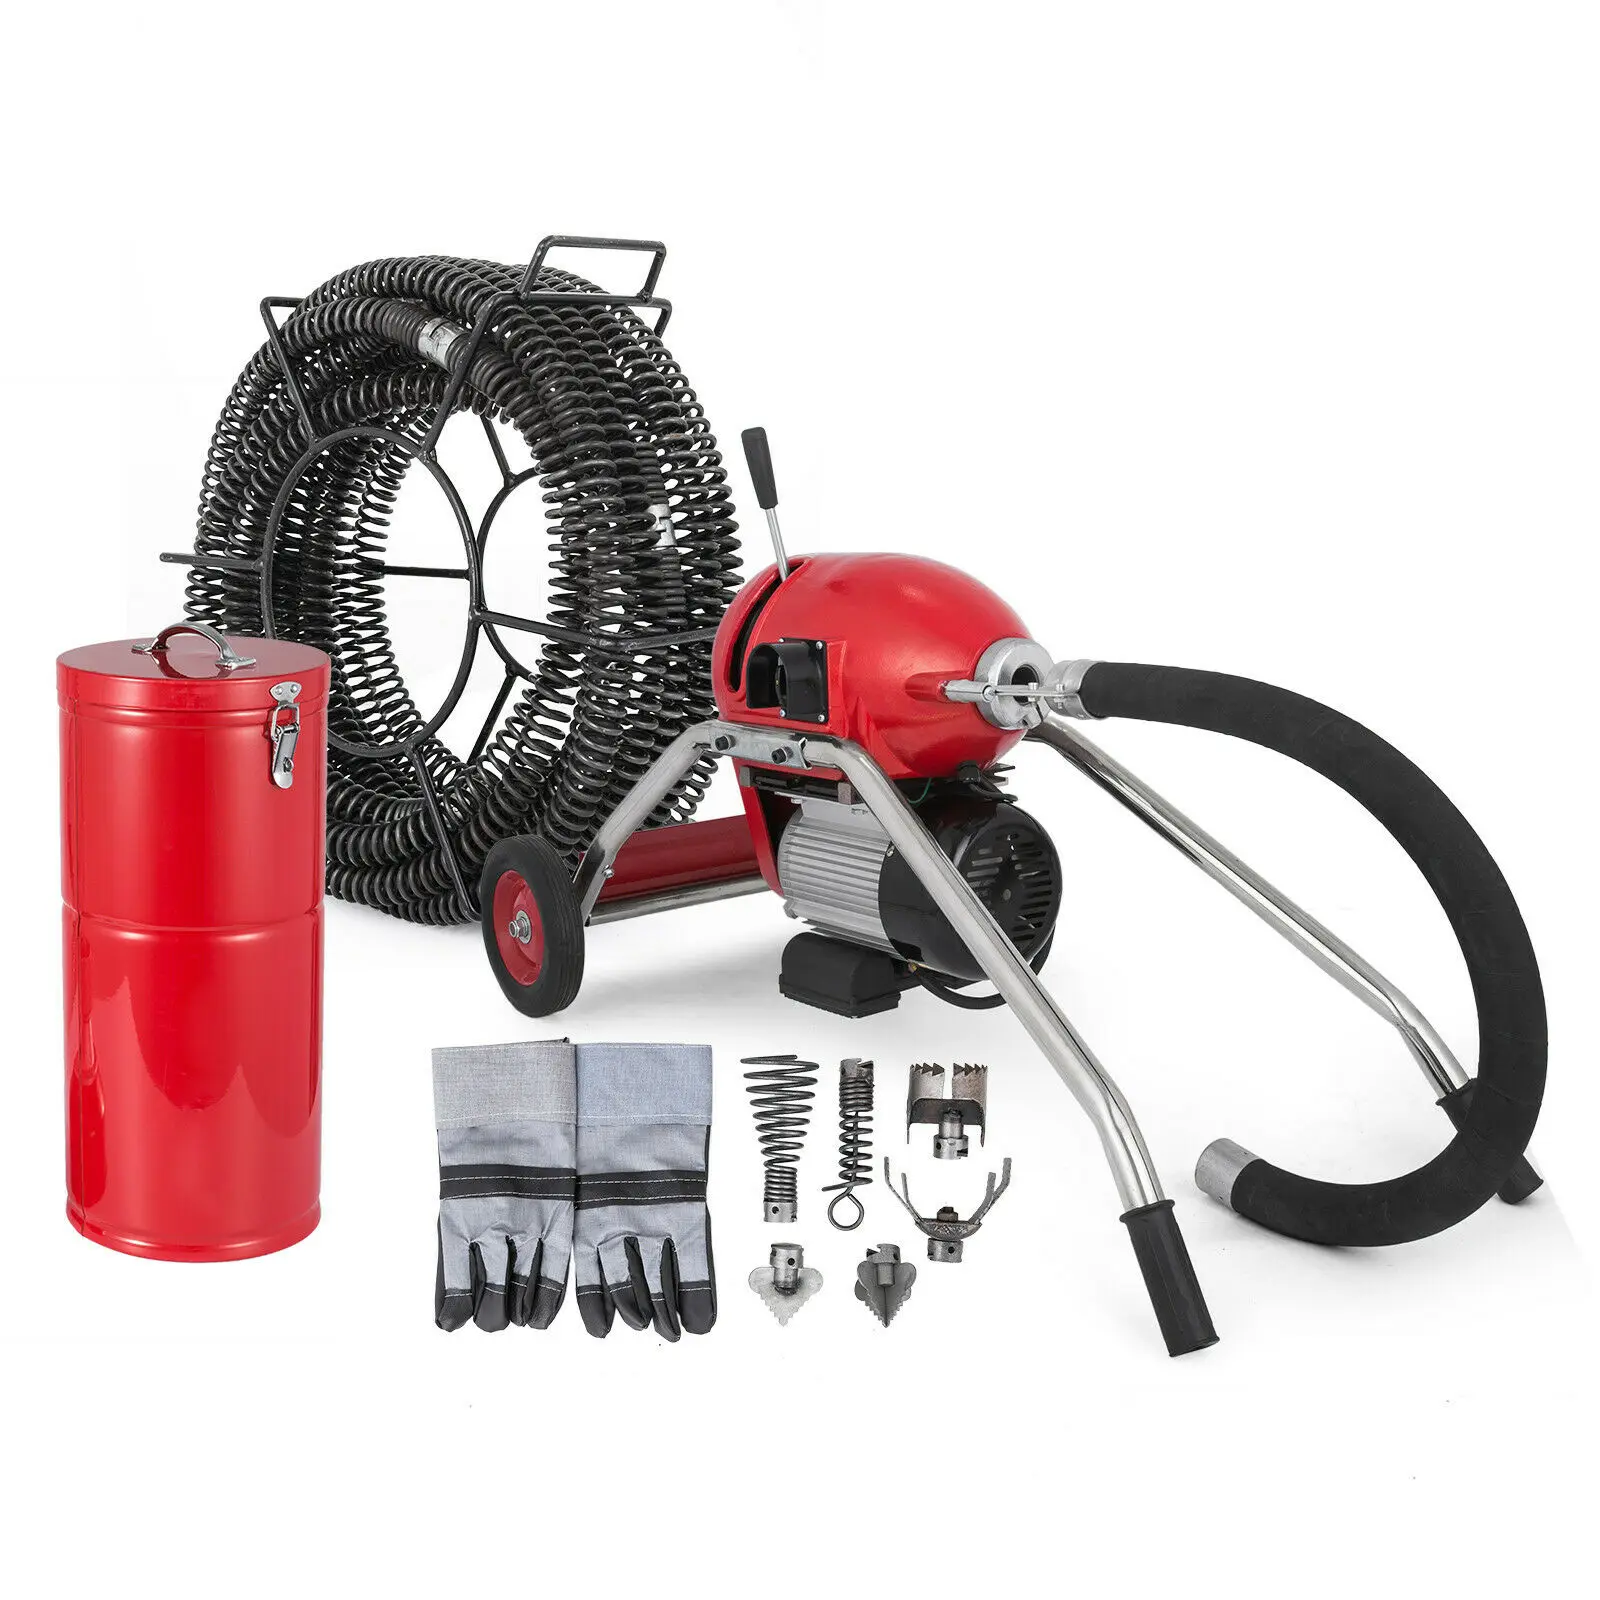 20-200mm Pipe Drain Cleaner 1100W Pipe Drain Cleaning Machine 16mx30mm Spiral Set with 6 cutters